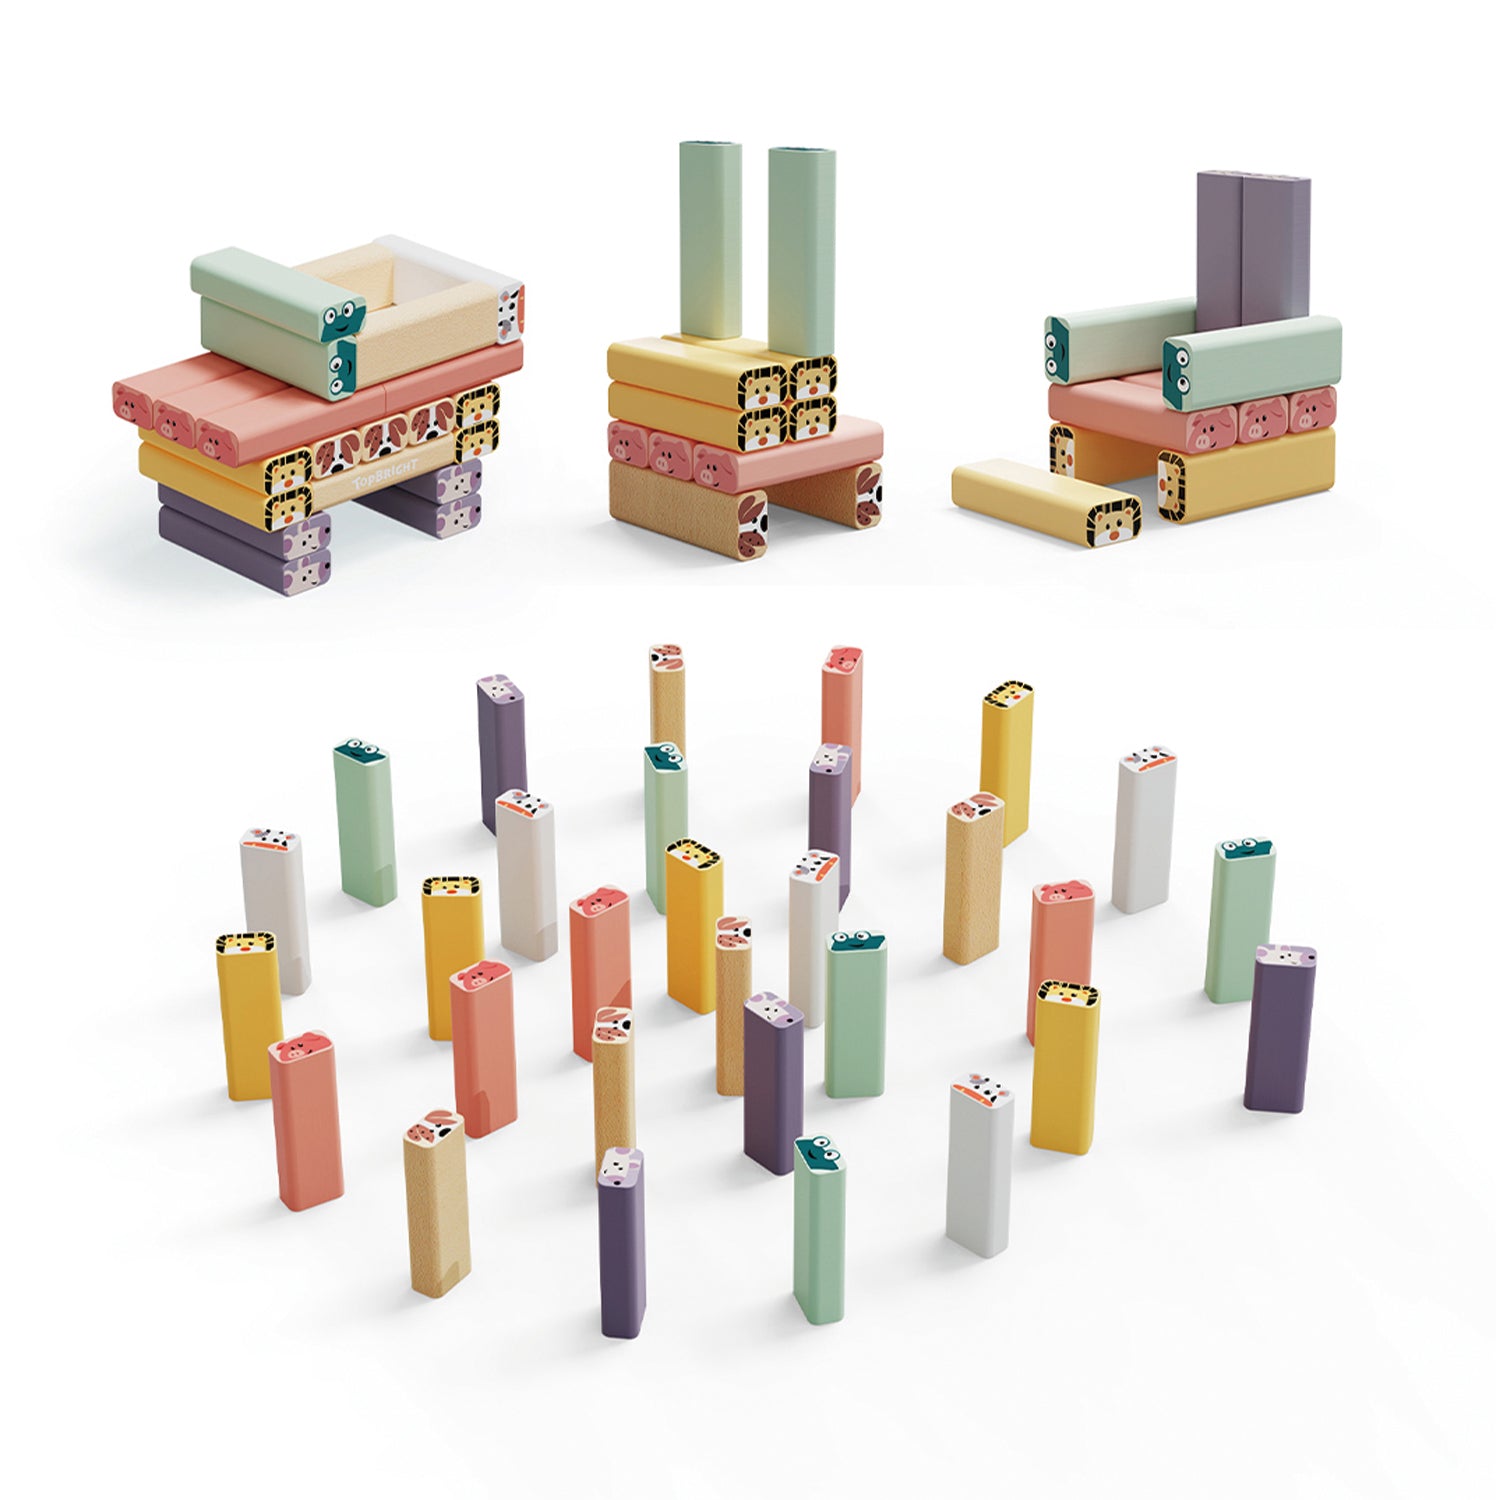 Use the blocks for creative constructions or as a colorful domino.